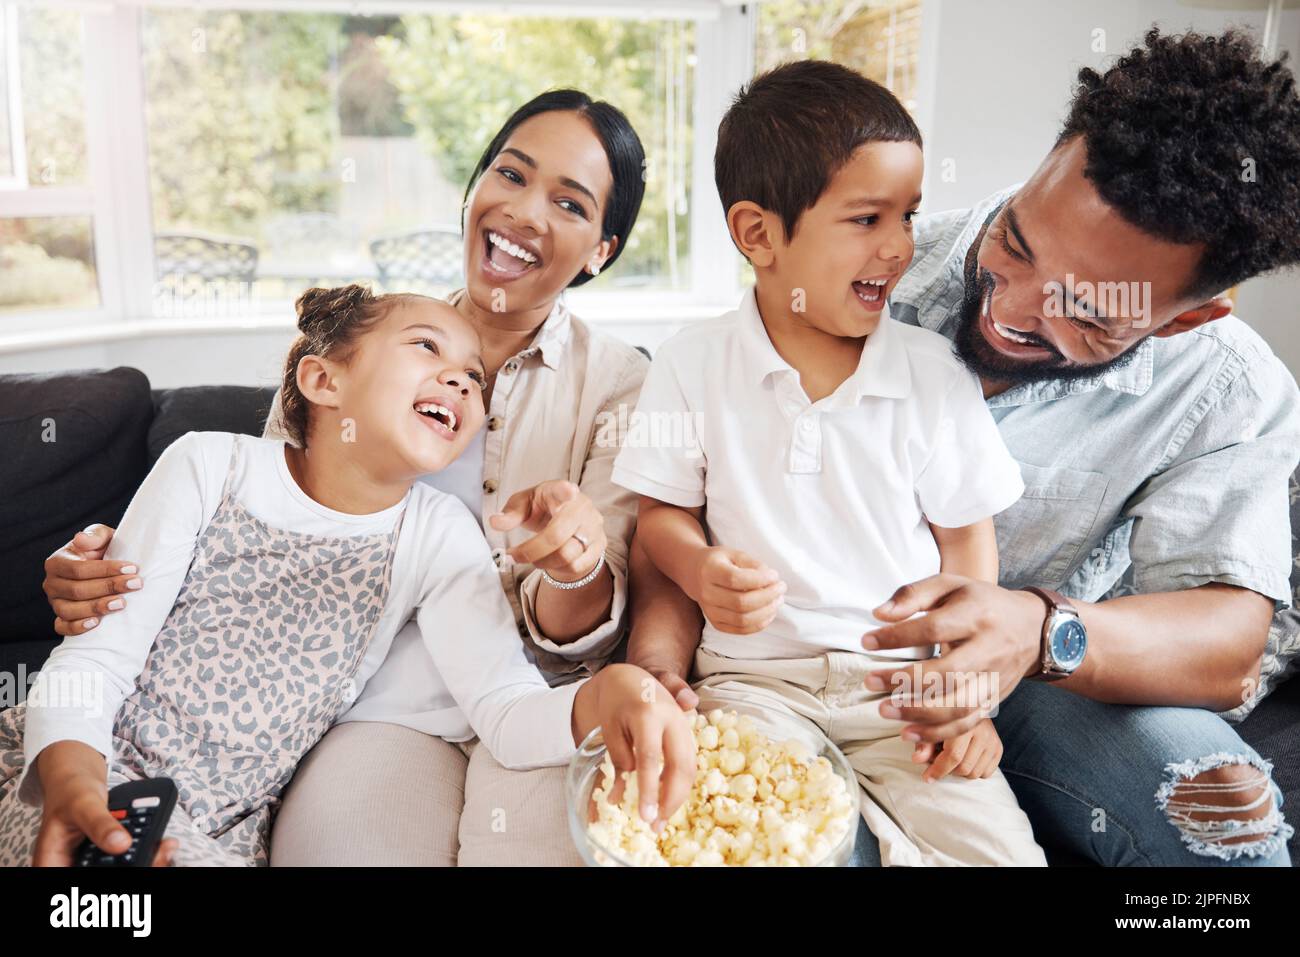 Family watching tv or a movie, having fun and eating popcorn together at home. Love and laughter with affectionate parents and happy children smiling Stock Photo